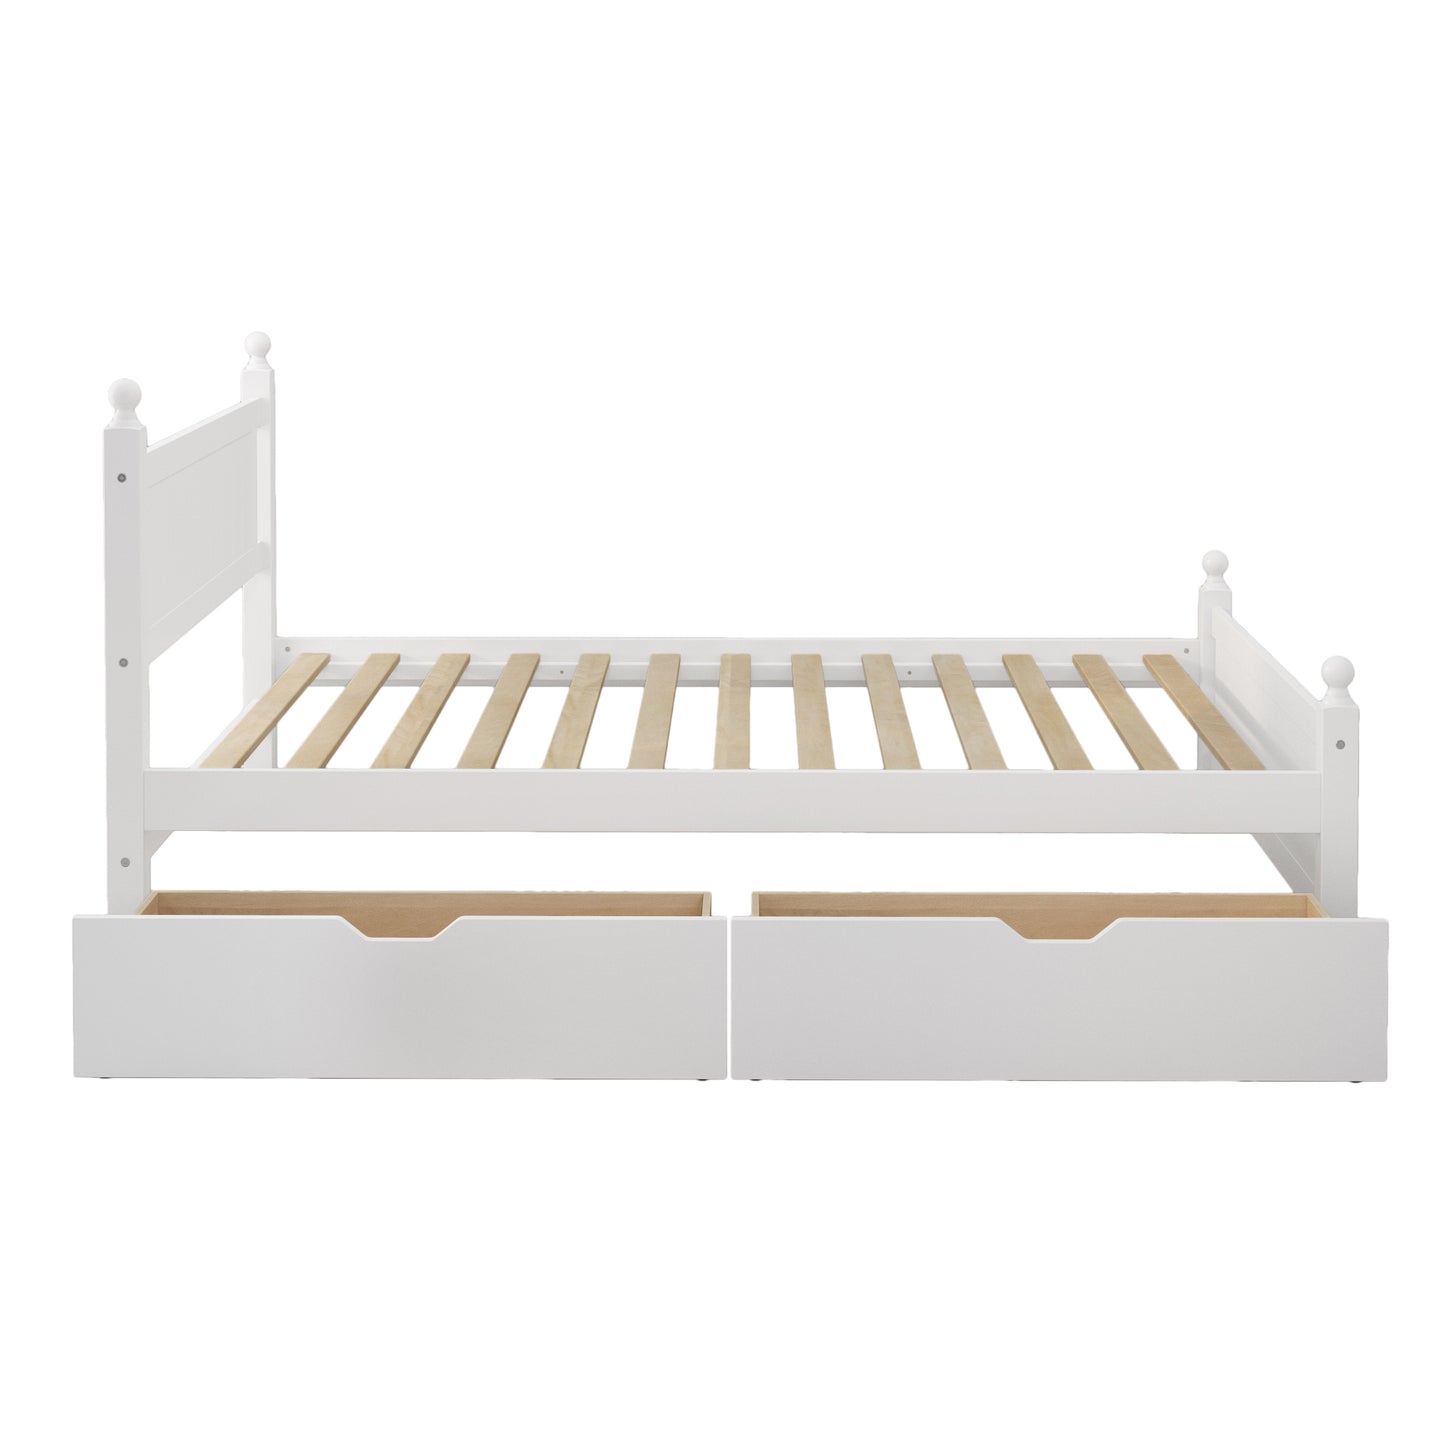 Full Size Solid Wood Platform Bed Frame with 2 drawers for Limited Space Kids, Teens, Adults, No Need Box Spring, White